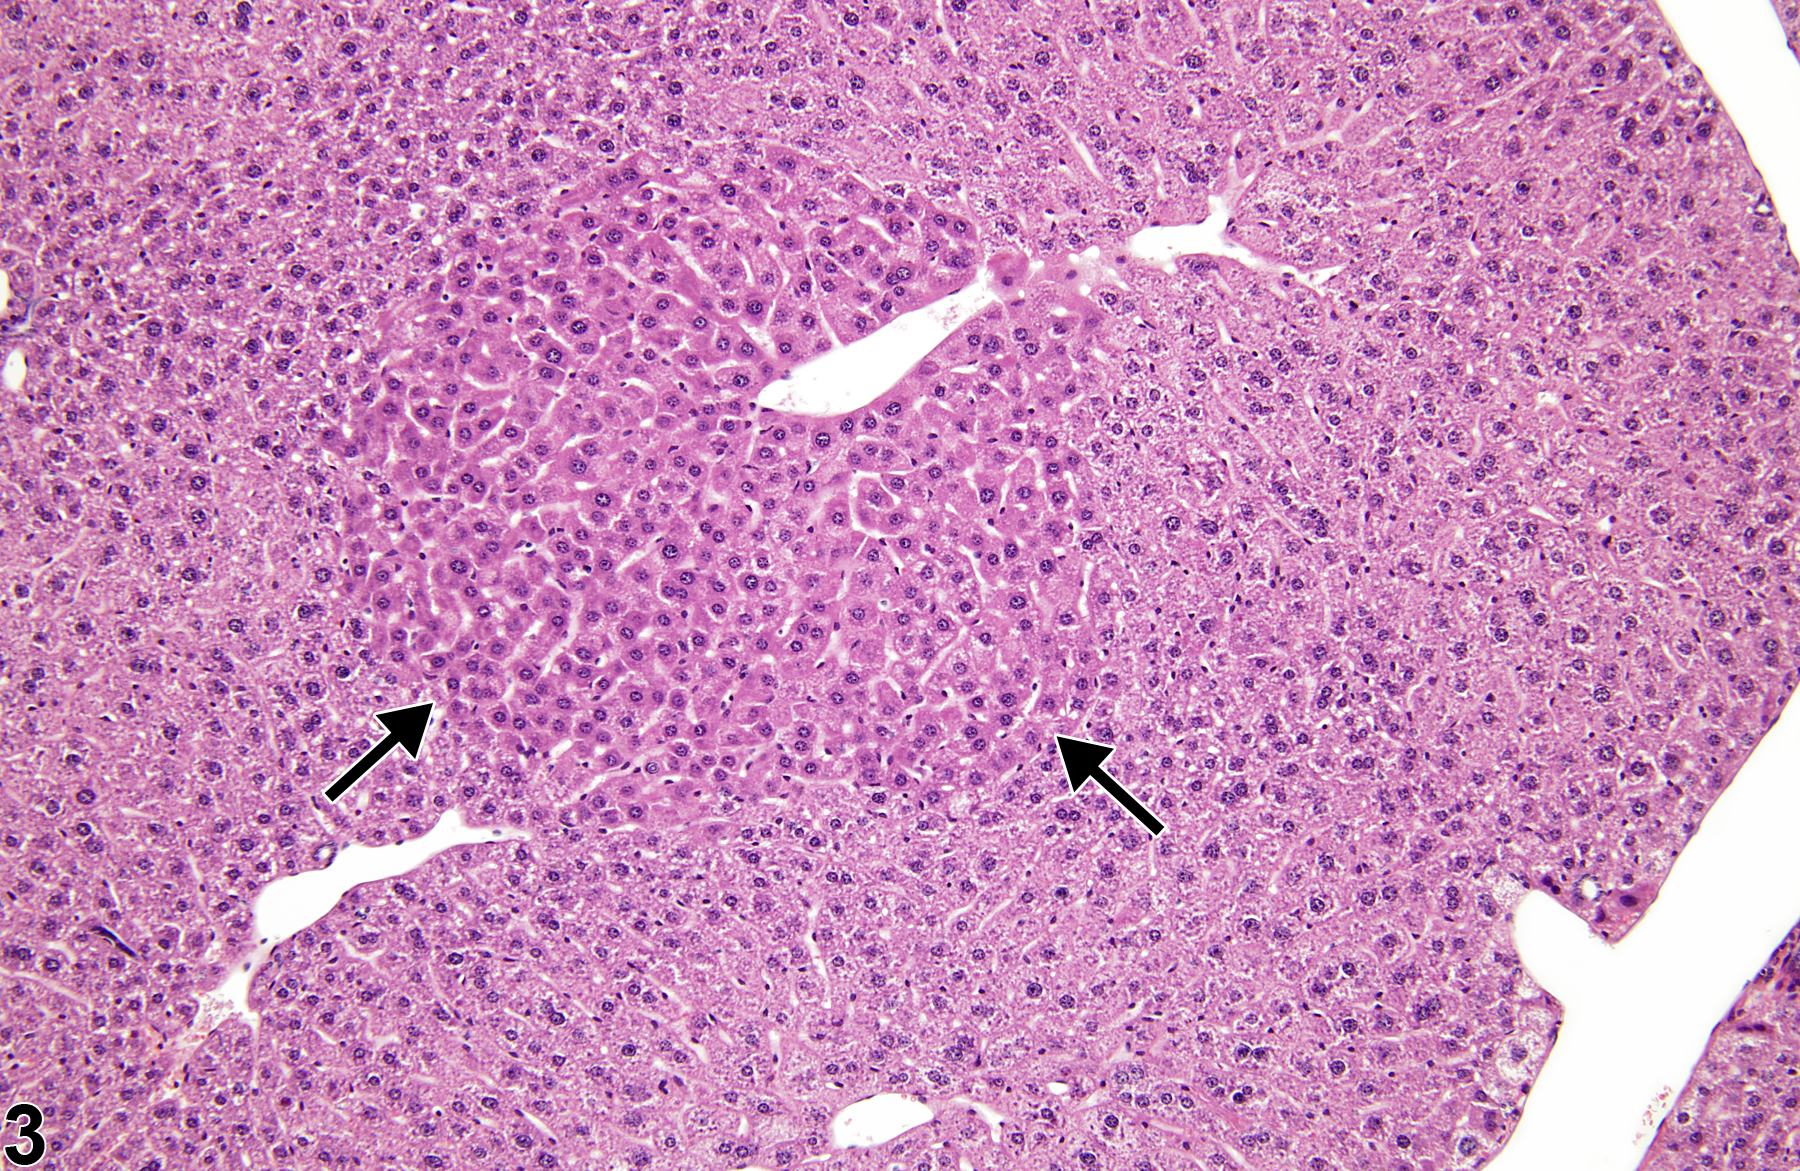 Image of eosinophilic focus in the liver from a male  B6C3F1 mouse in a chronic study